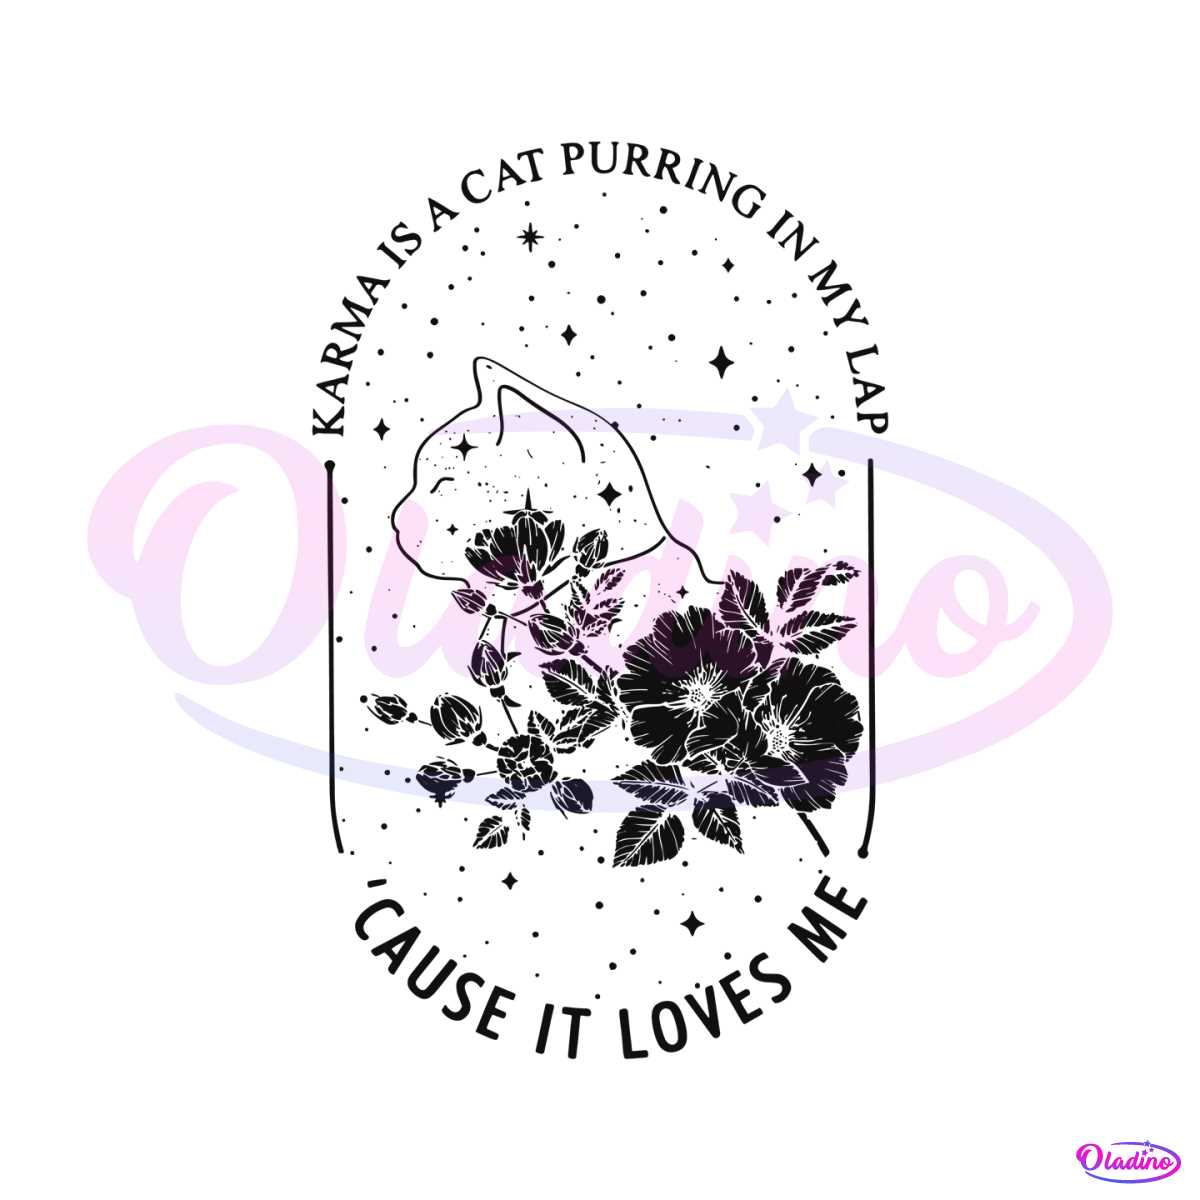 karma-is-a-cat-purring-in-my-lap-taylor-song-svg-cutting-file